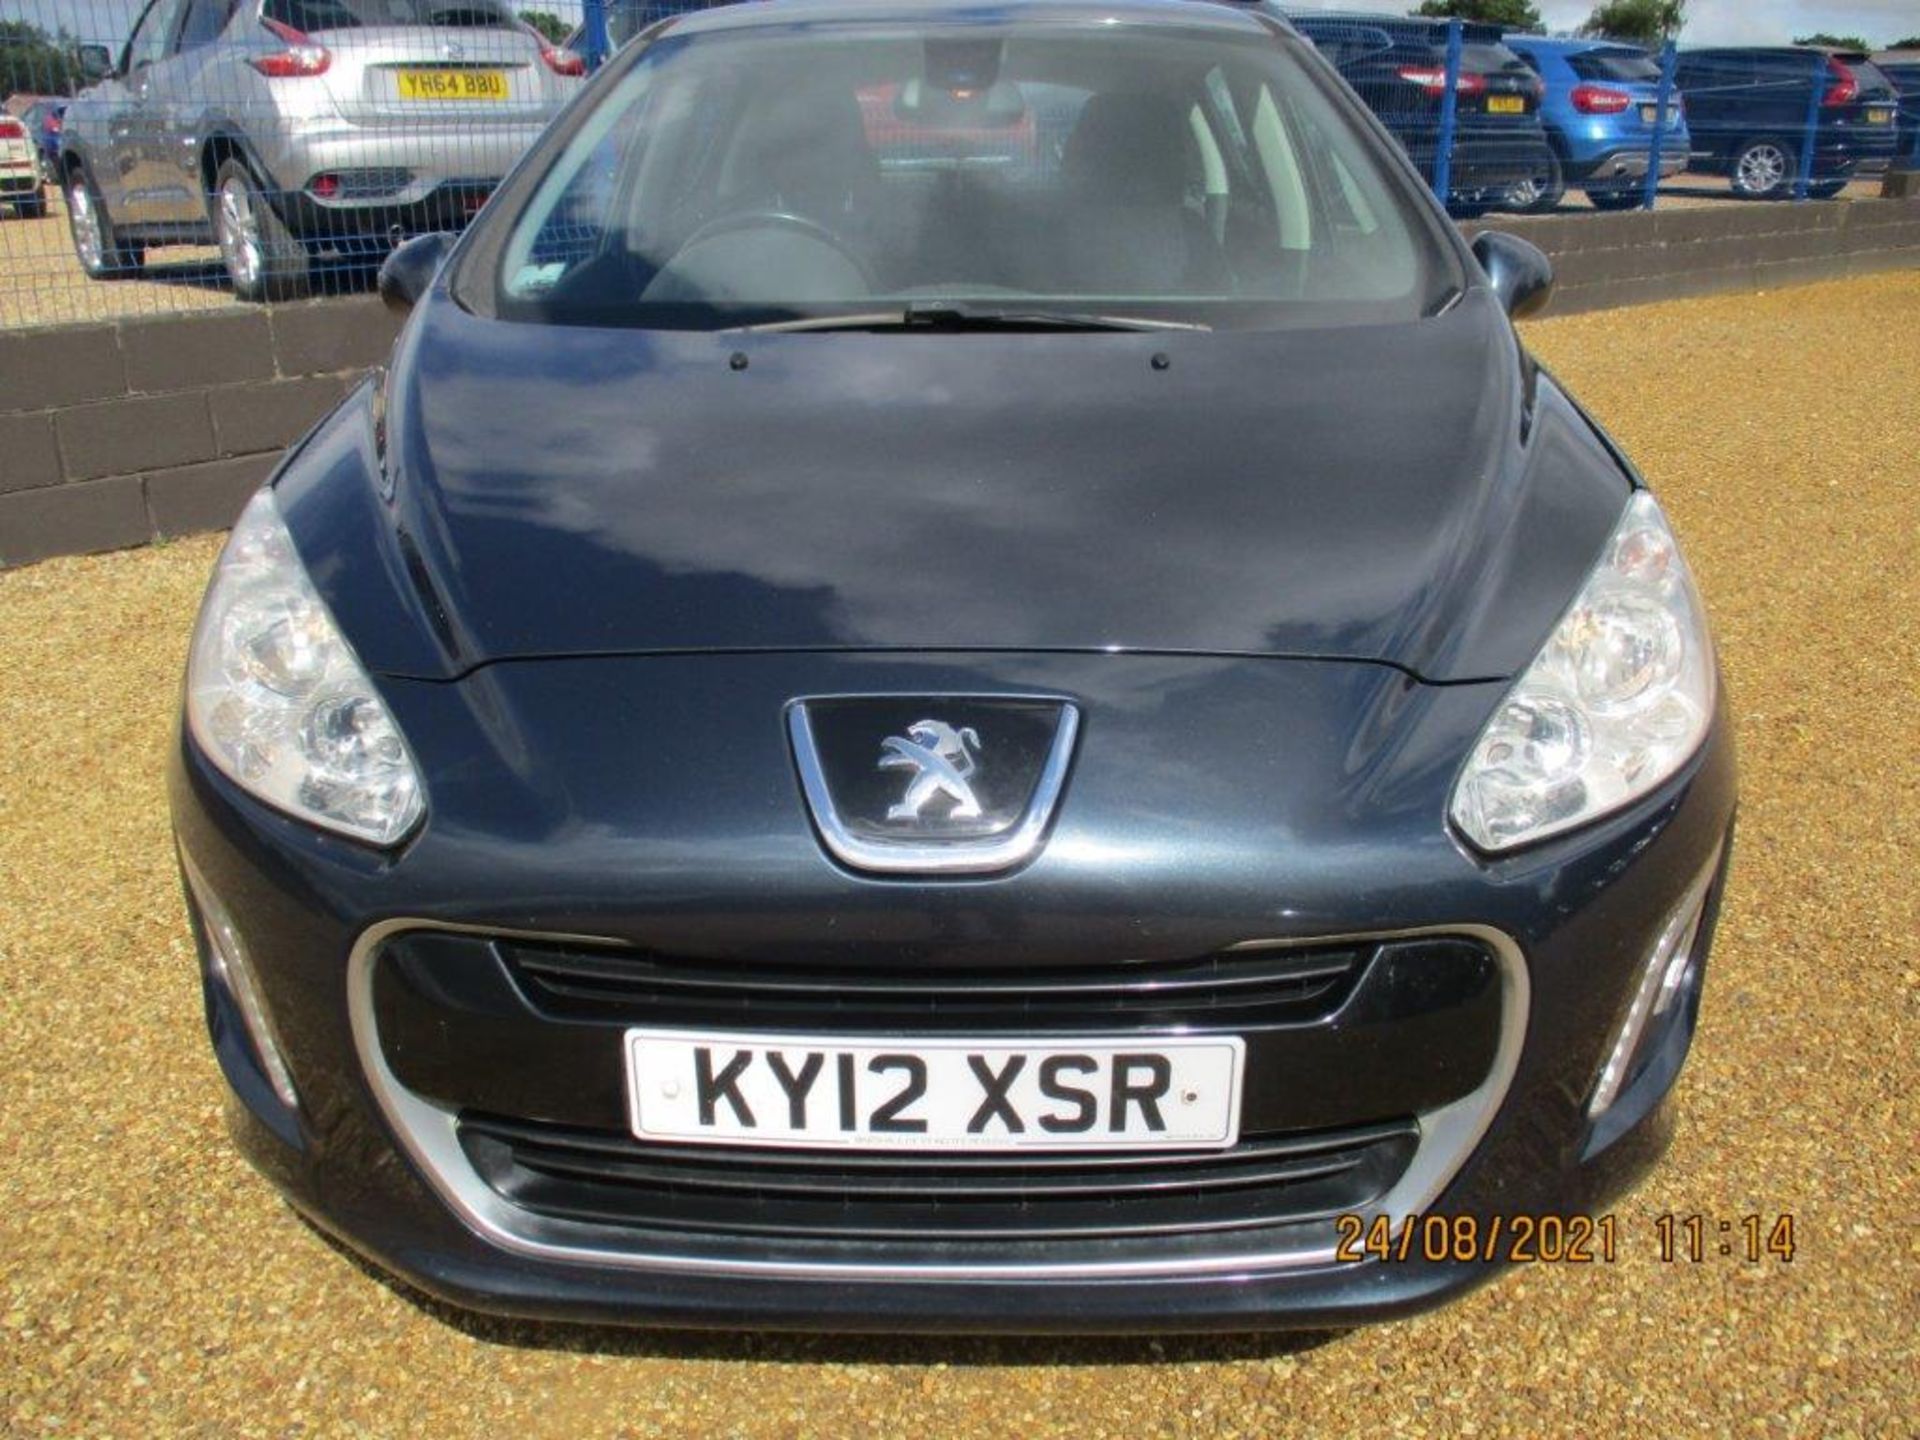 12 12 Peugeot 308 Active HDI - Image 6 of 18